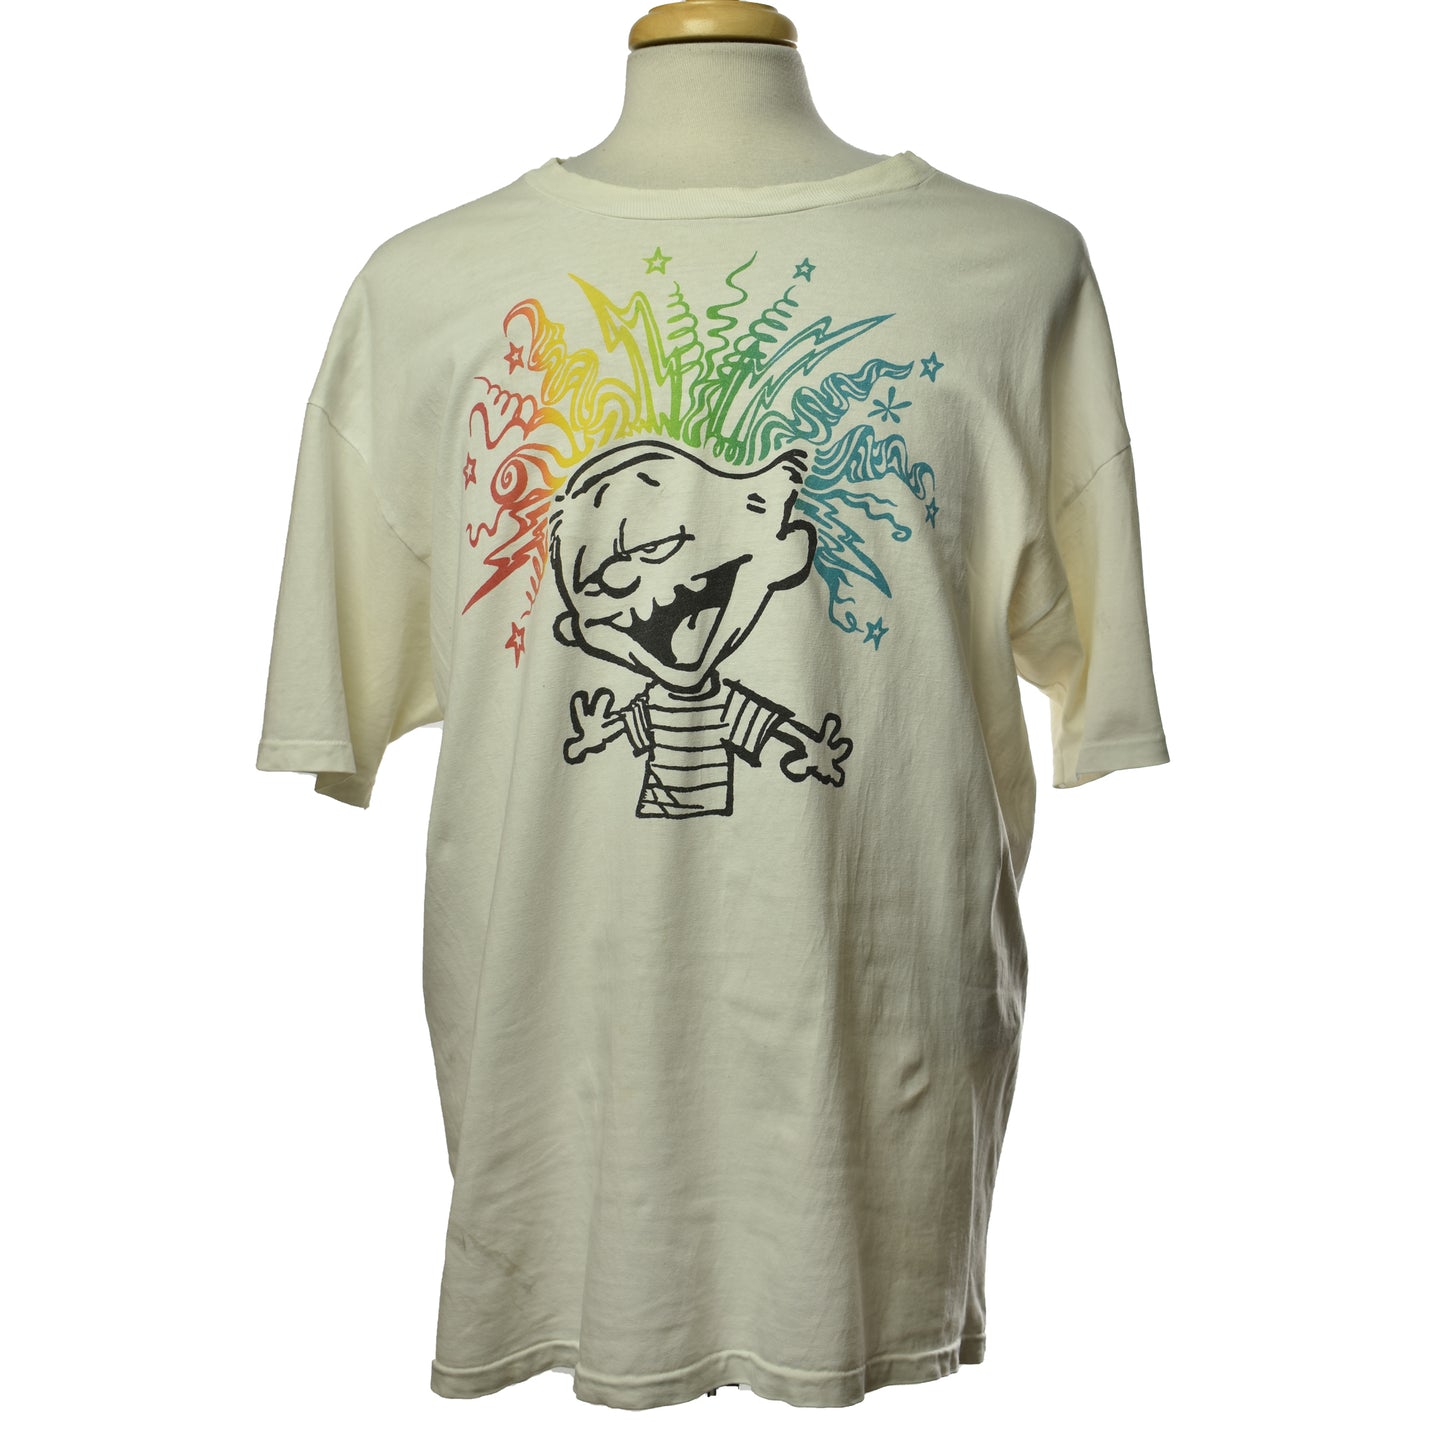 Vintage Grateful Dead Calvin and Hobbes "Never Had Such a Good Time" Single Stitch Graphic Hanes Beefy T 100% Cotton Made in USA